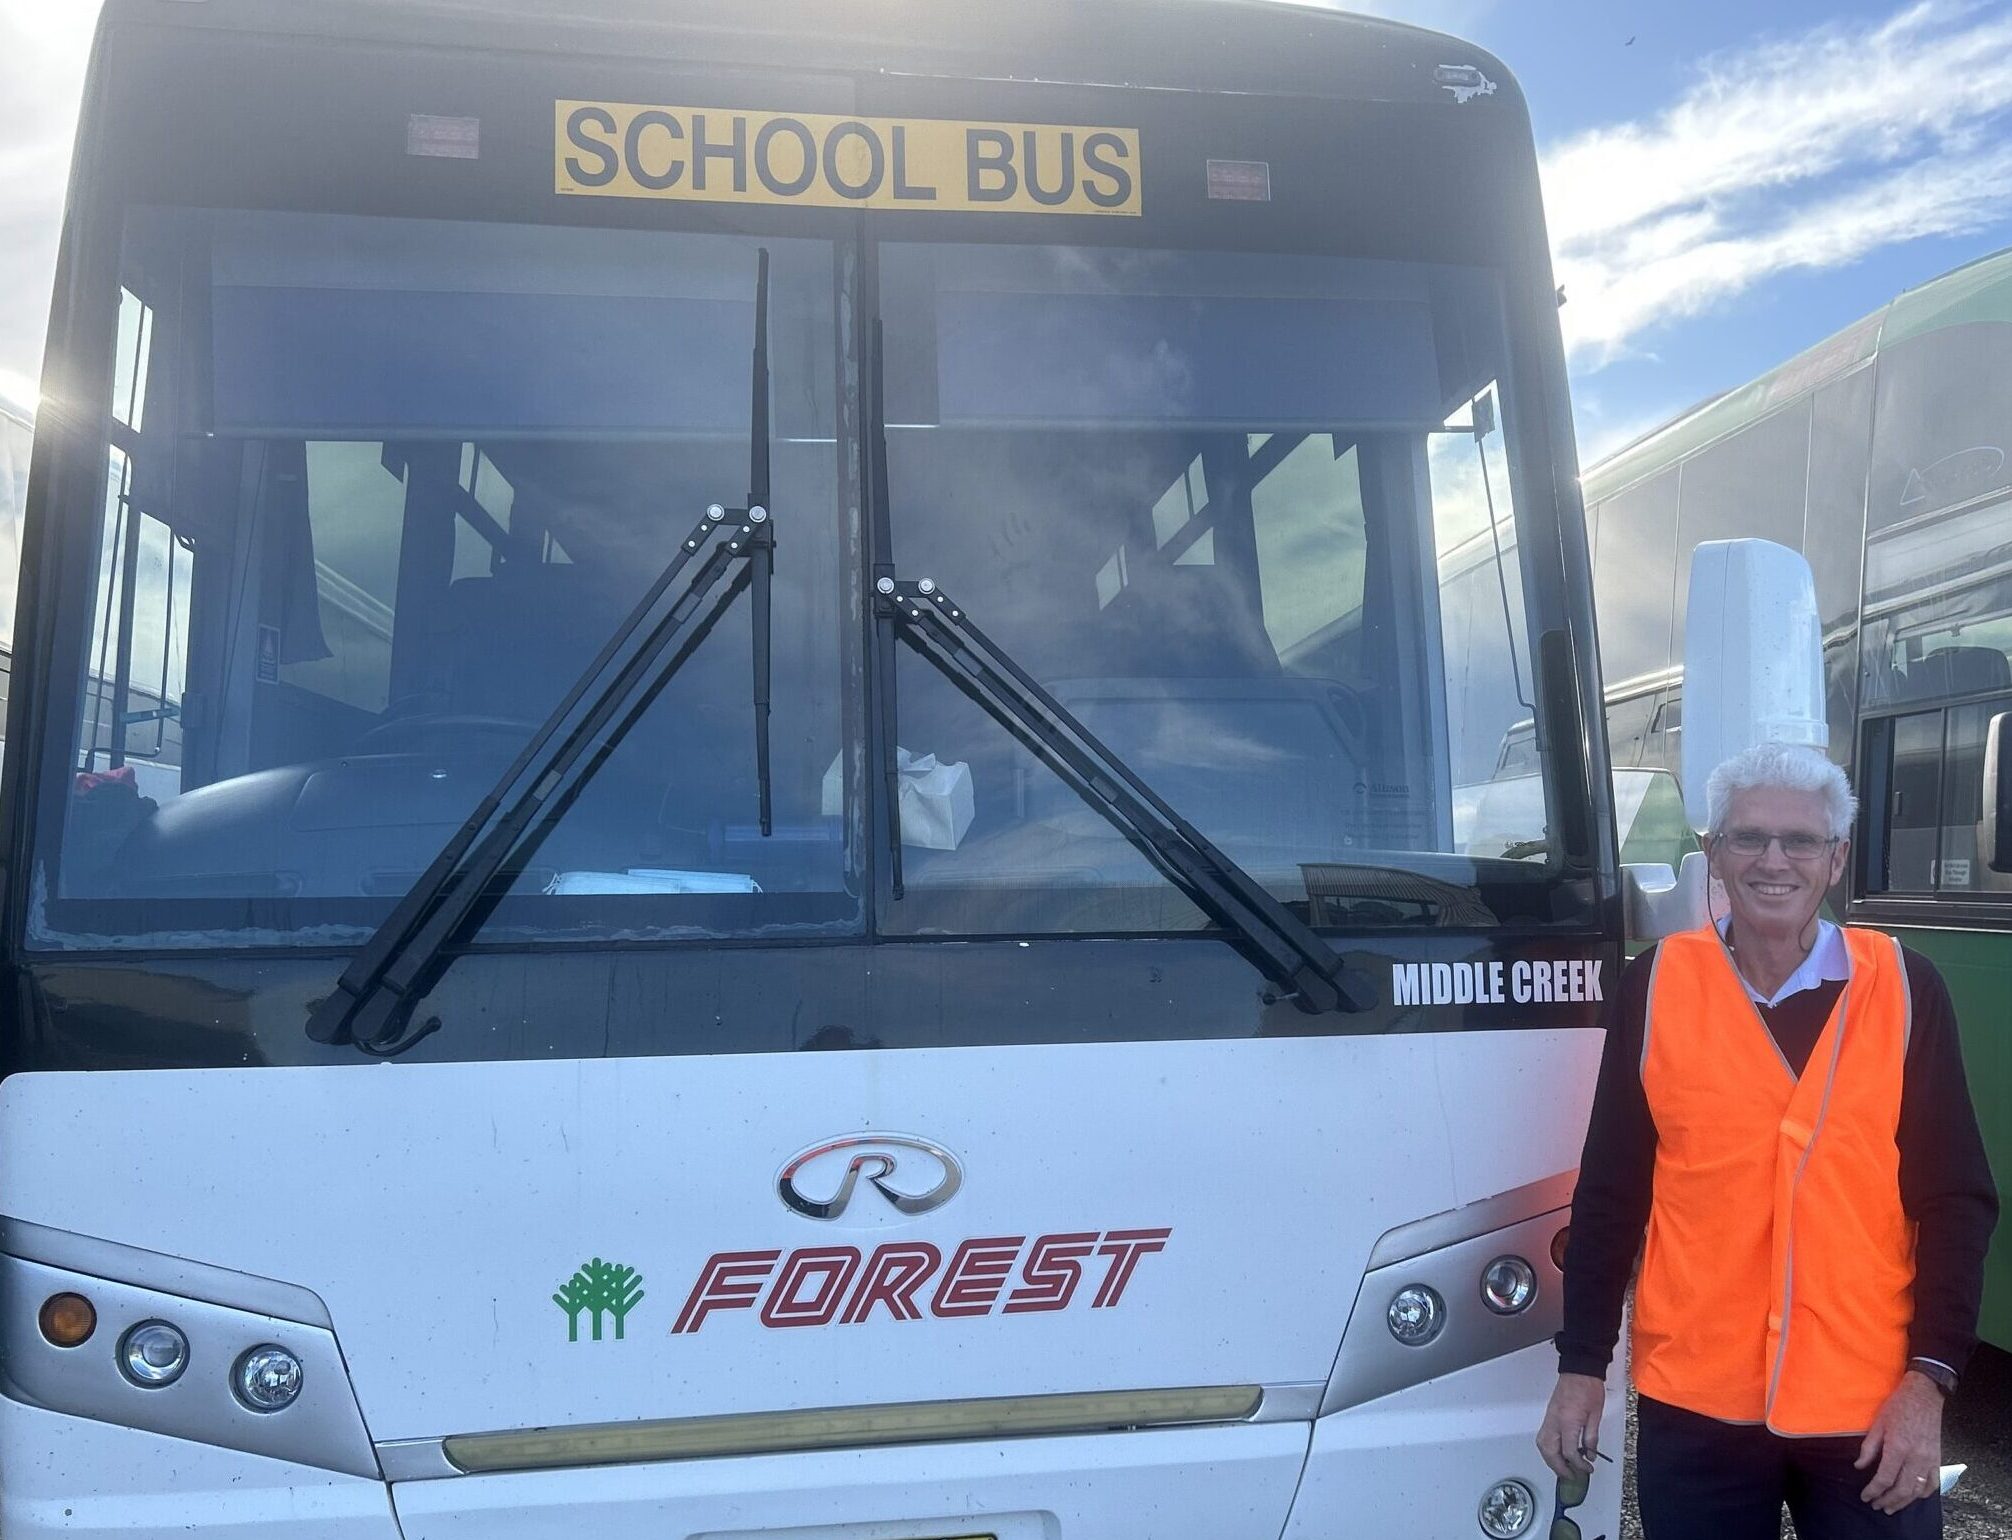 Jeff Smith Started His Career As A Bus Driver After He Retired From A Previous Job.